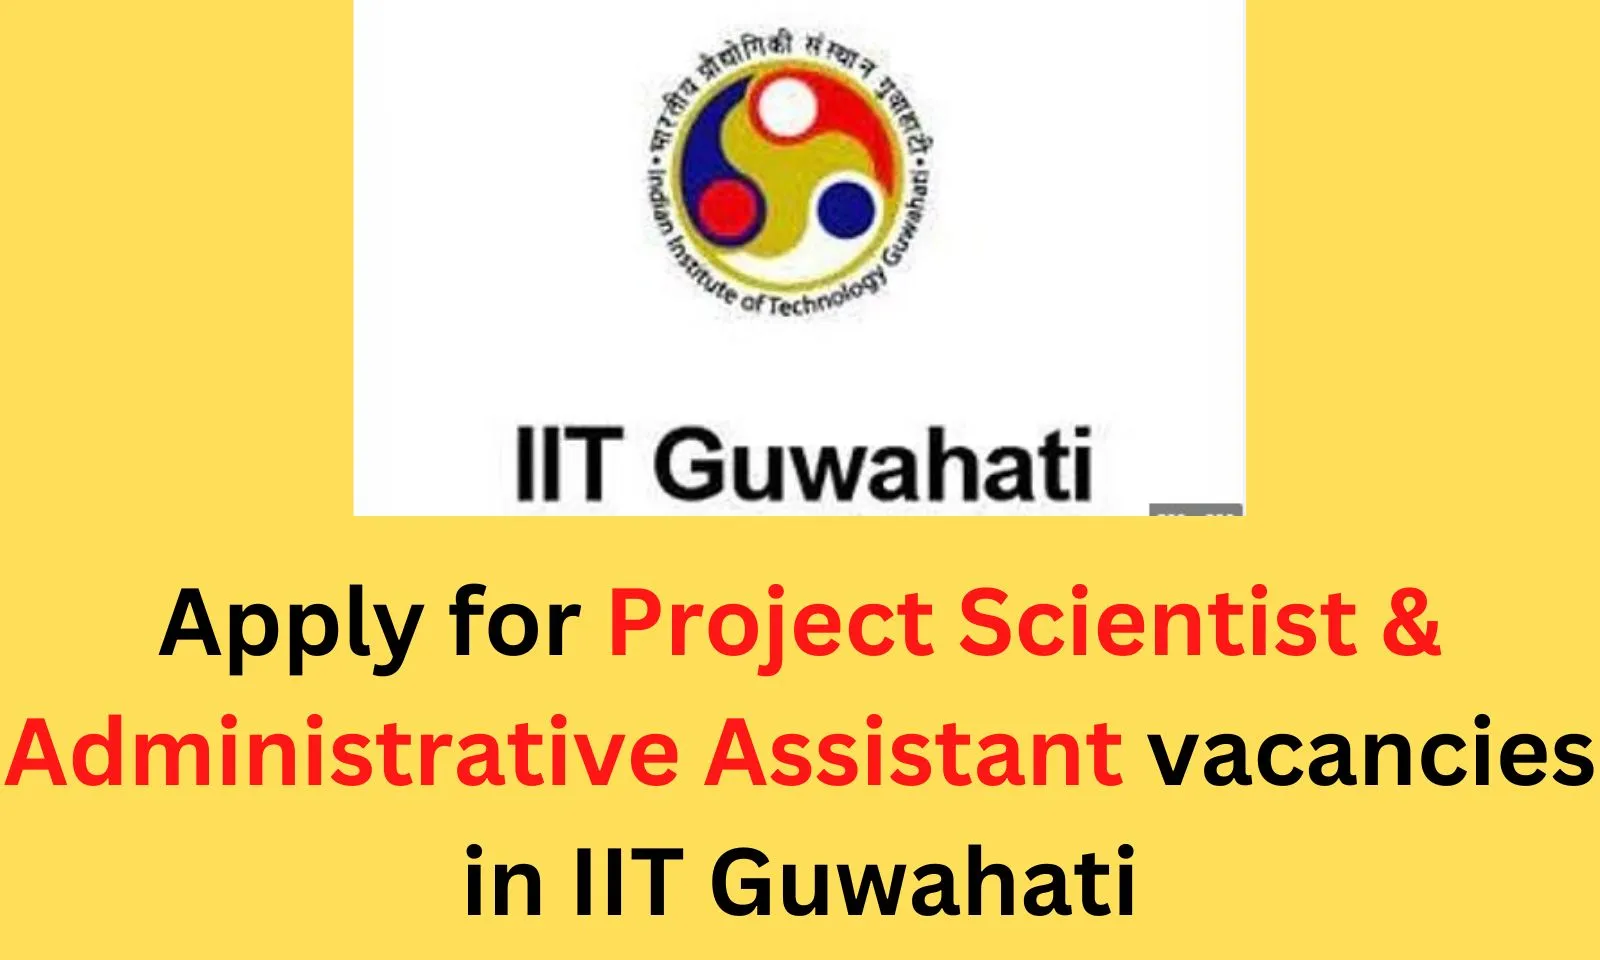 Apply for Project Scientist & Administrative Assistant vacancies in IIT Guwahati